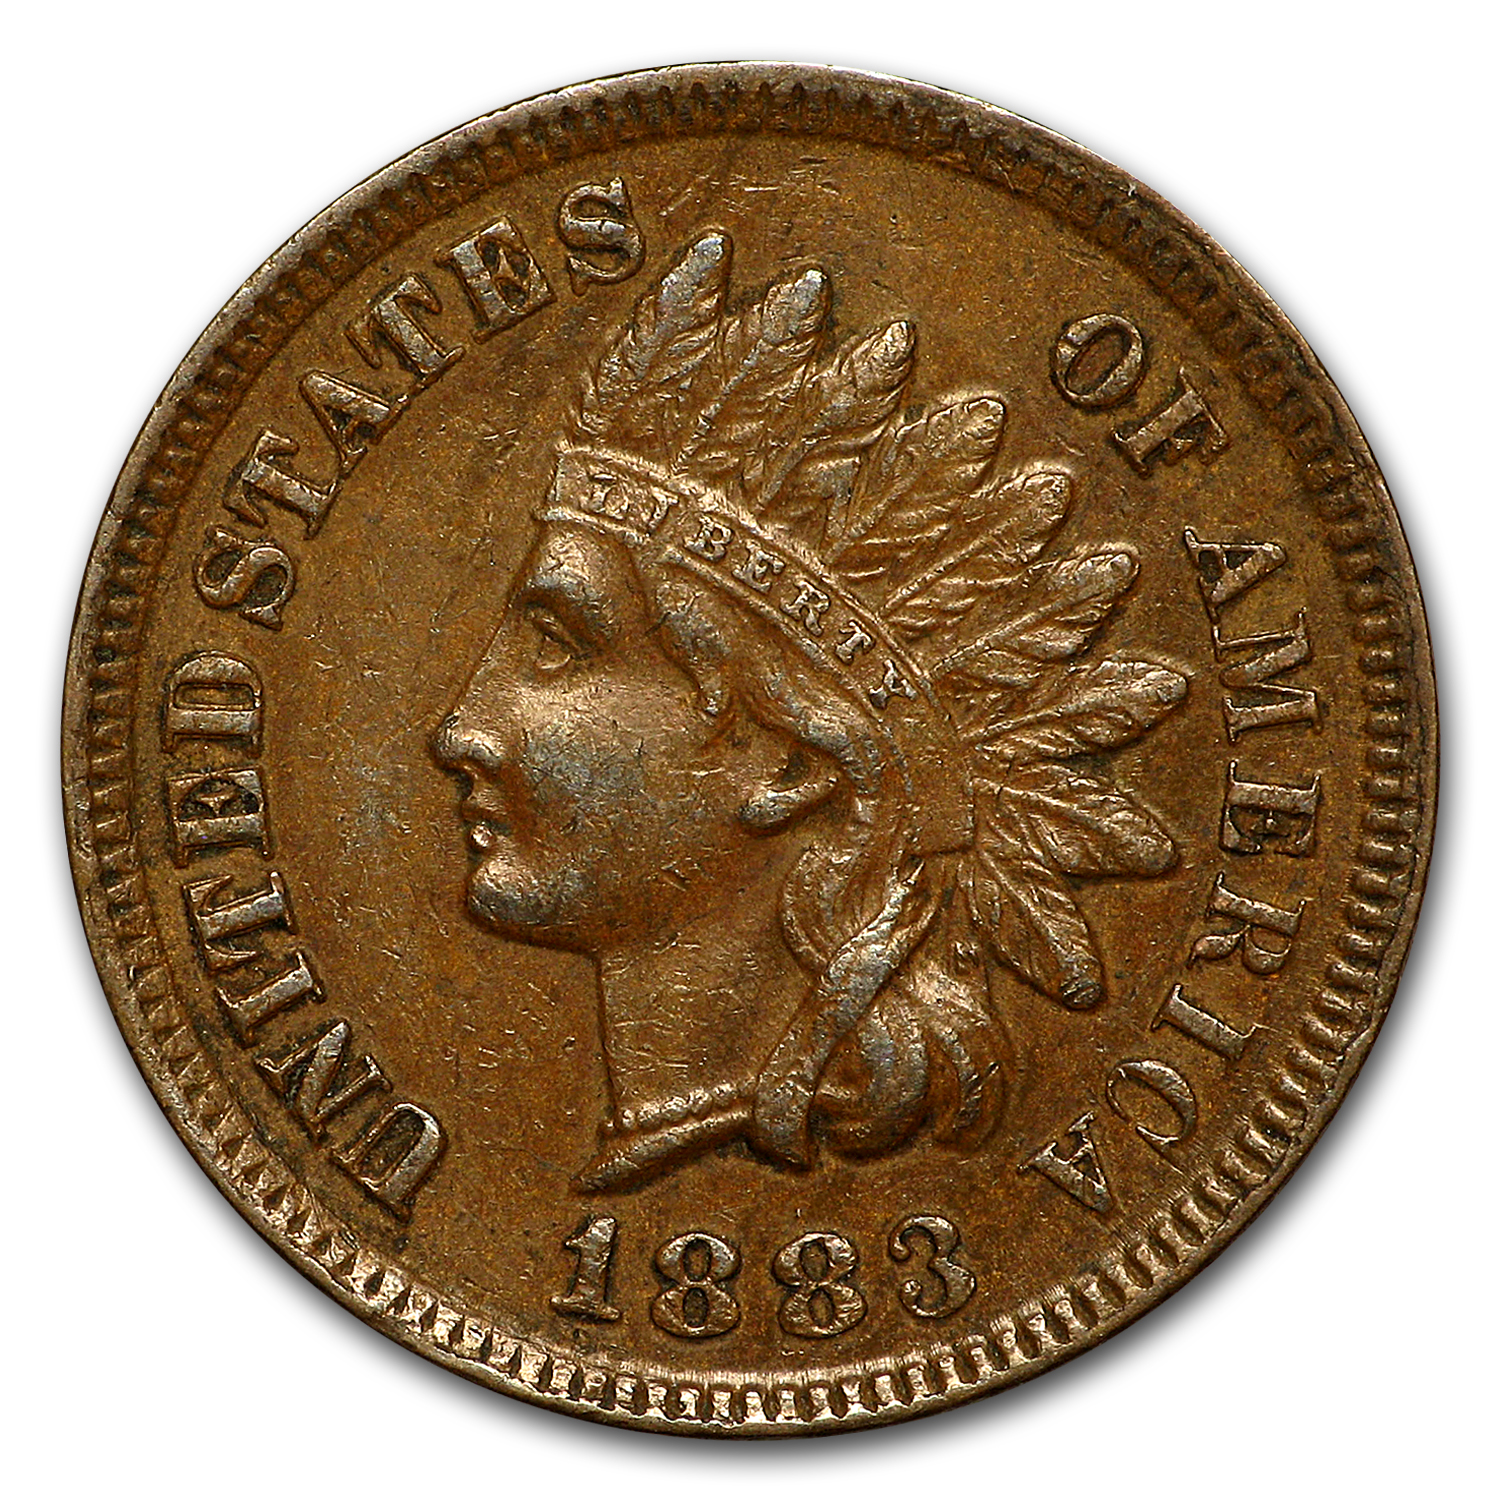 Buy 1883 Indian Head Cent XF